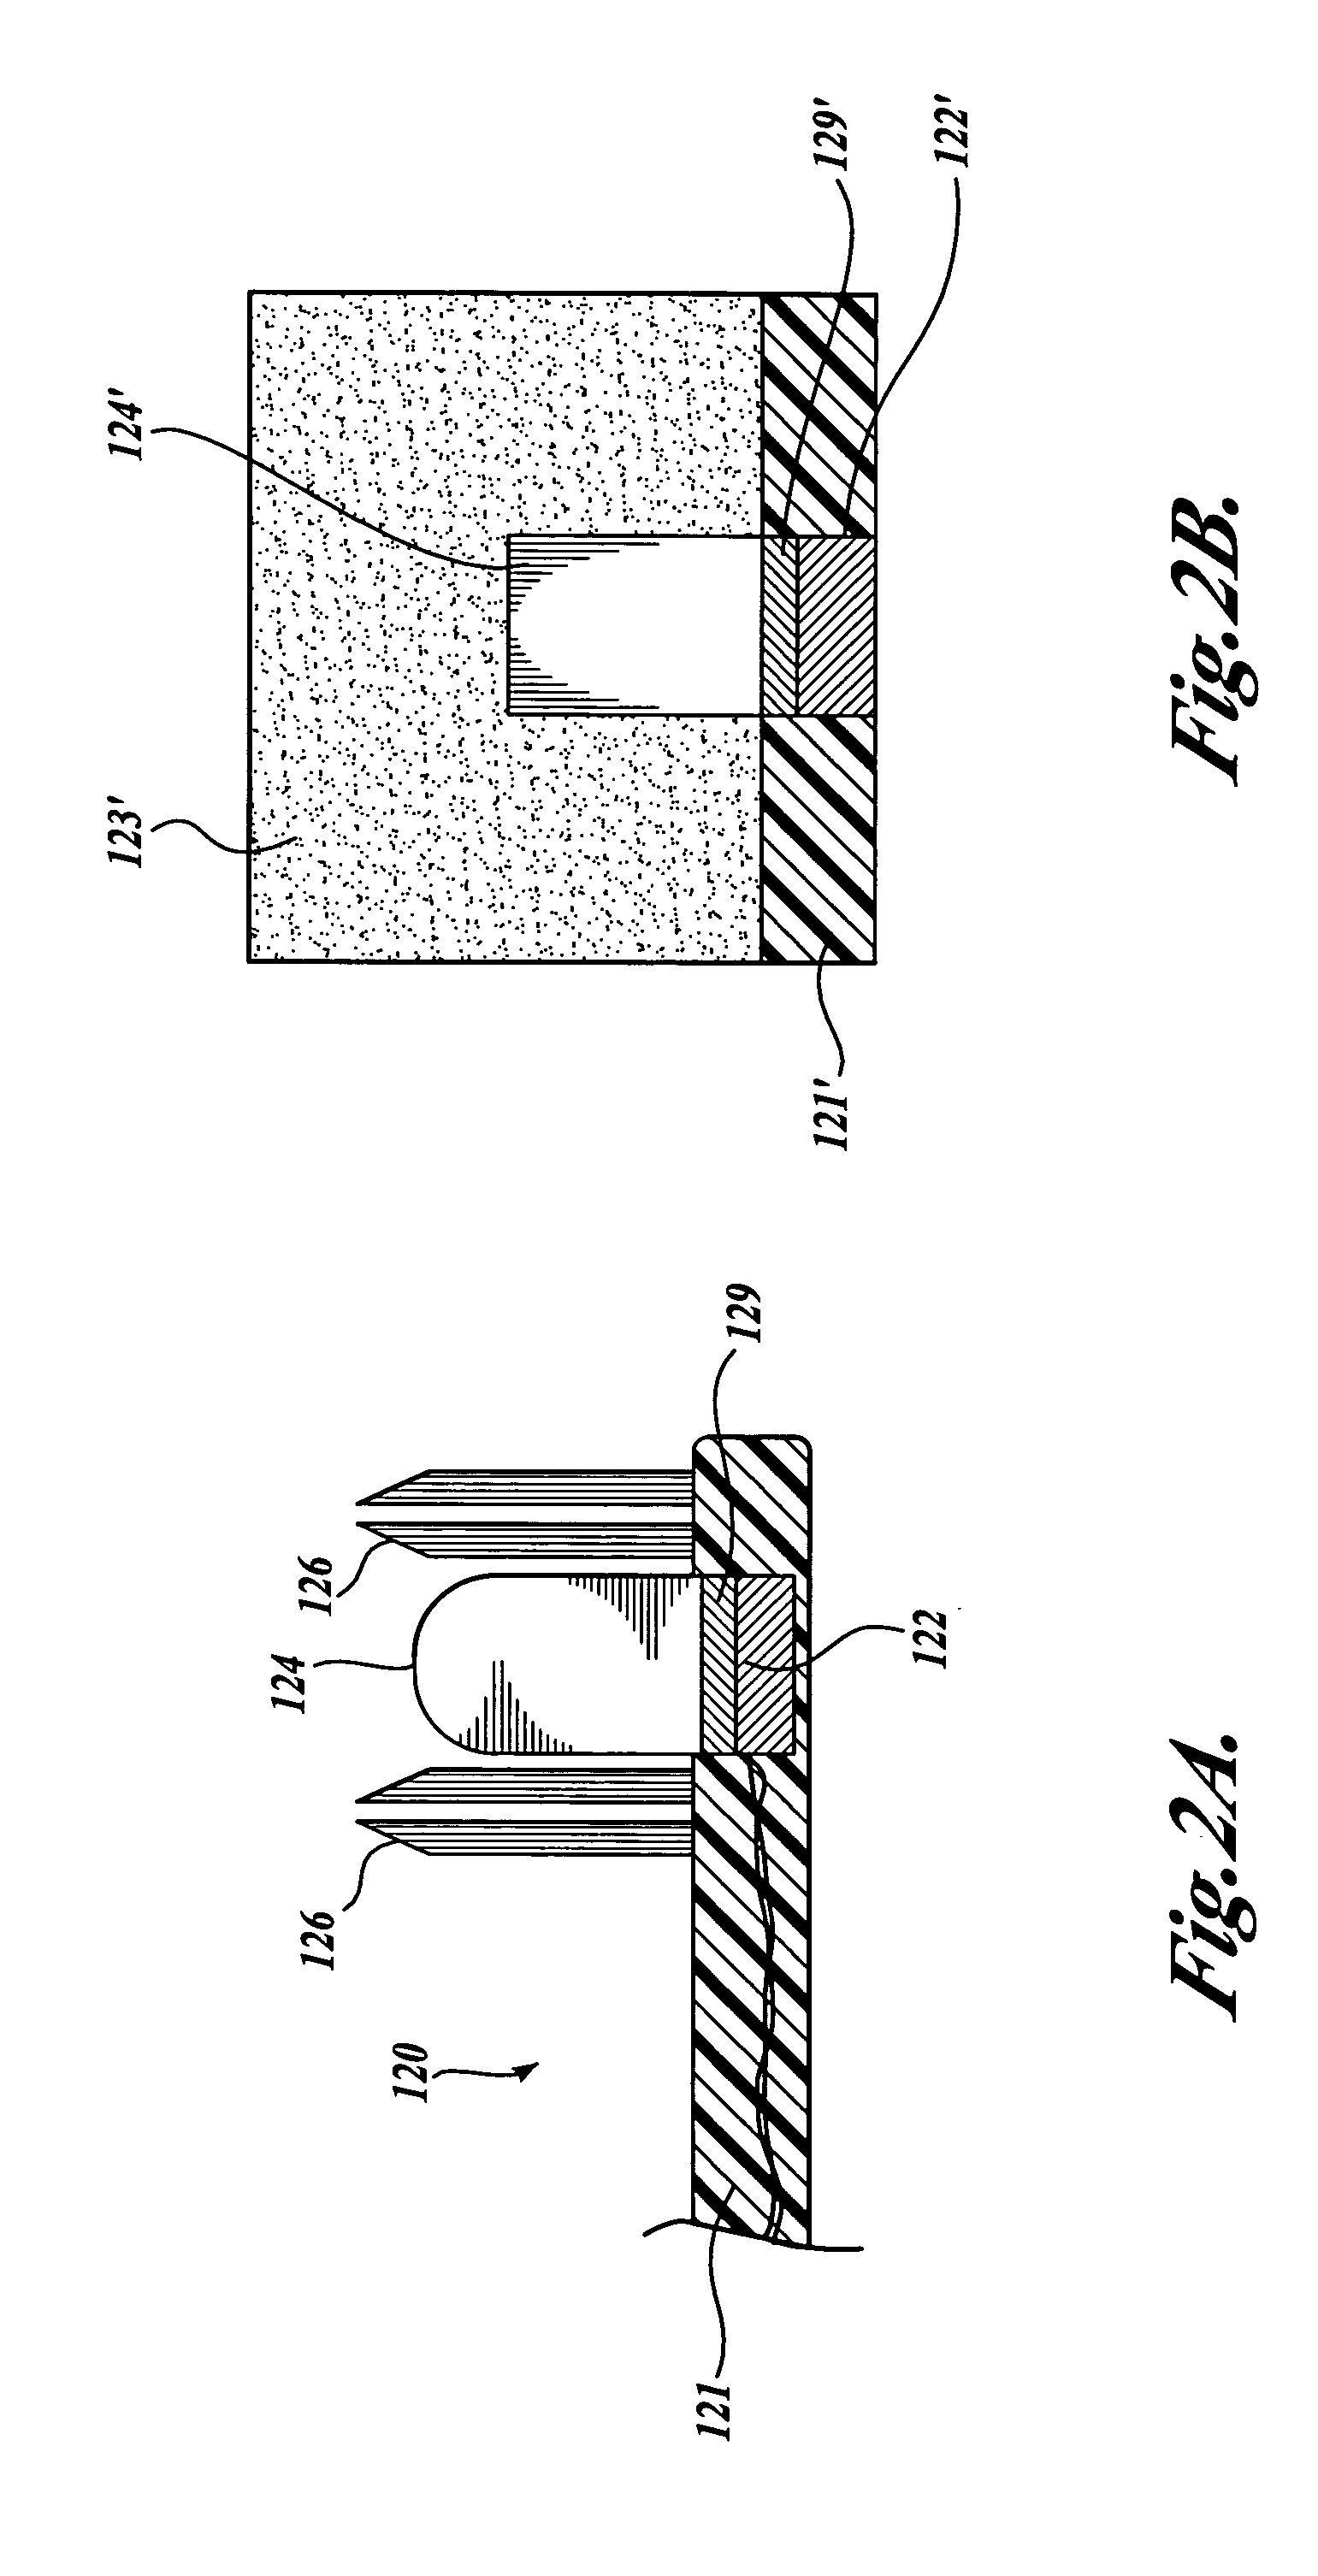 Toothbrush employing an acoustic waveguide